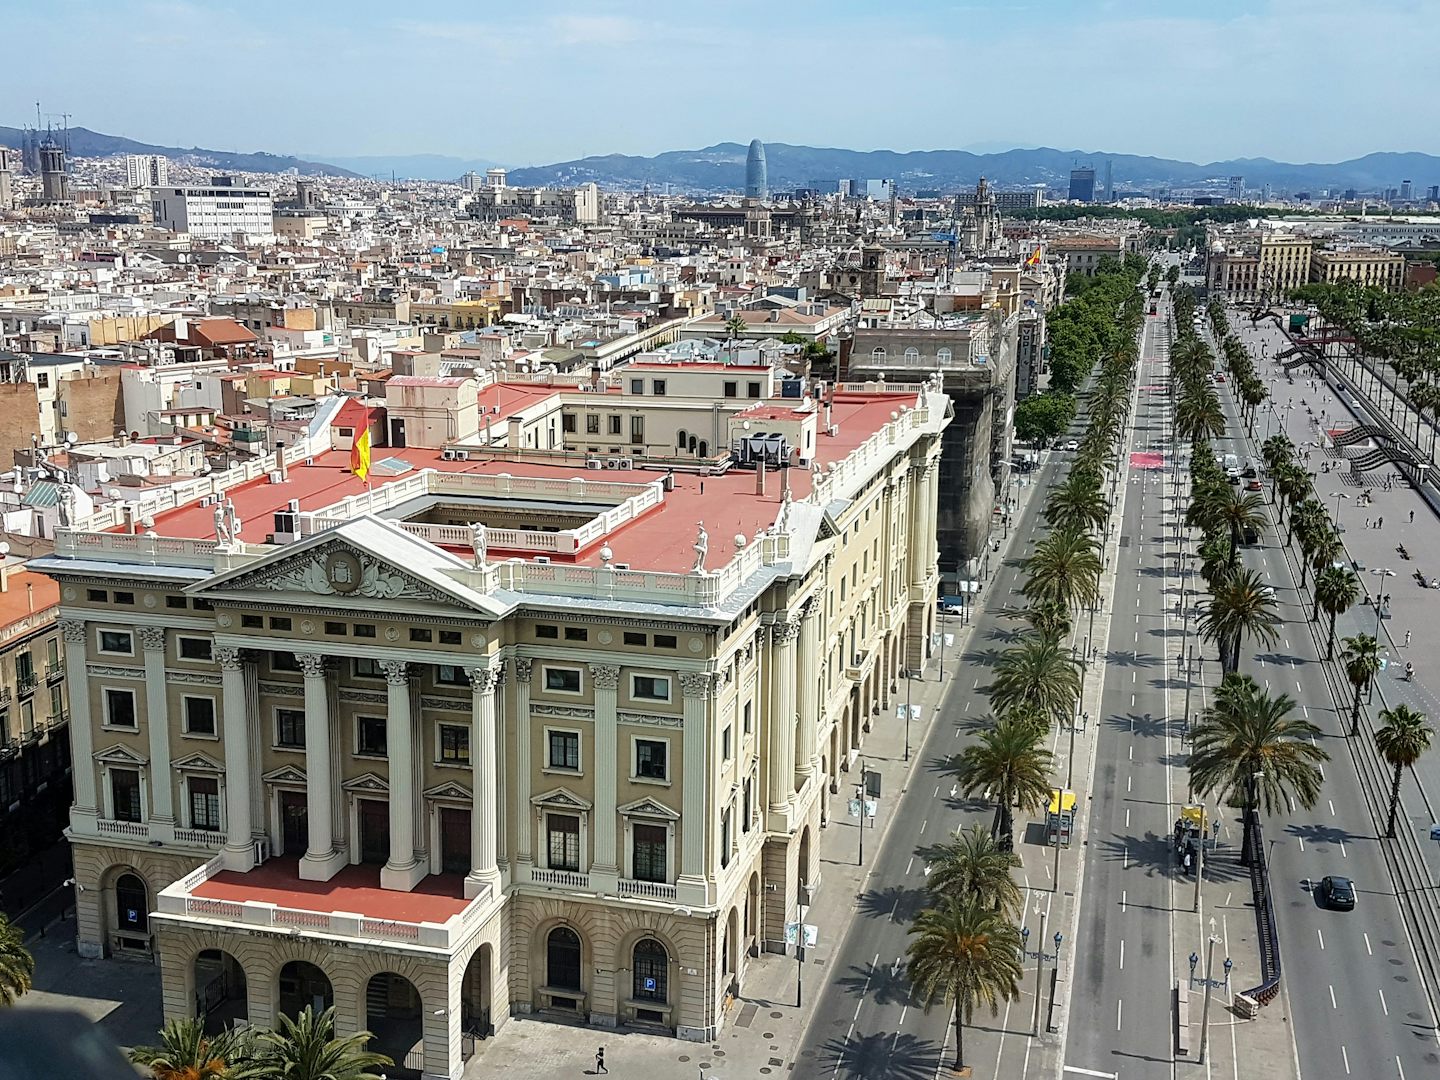 Panoramic view of Barcelona from the deck on Columbus statute